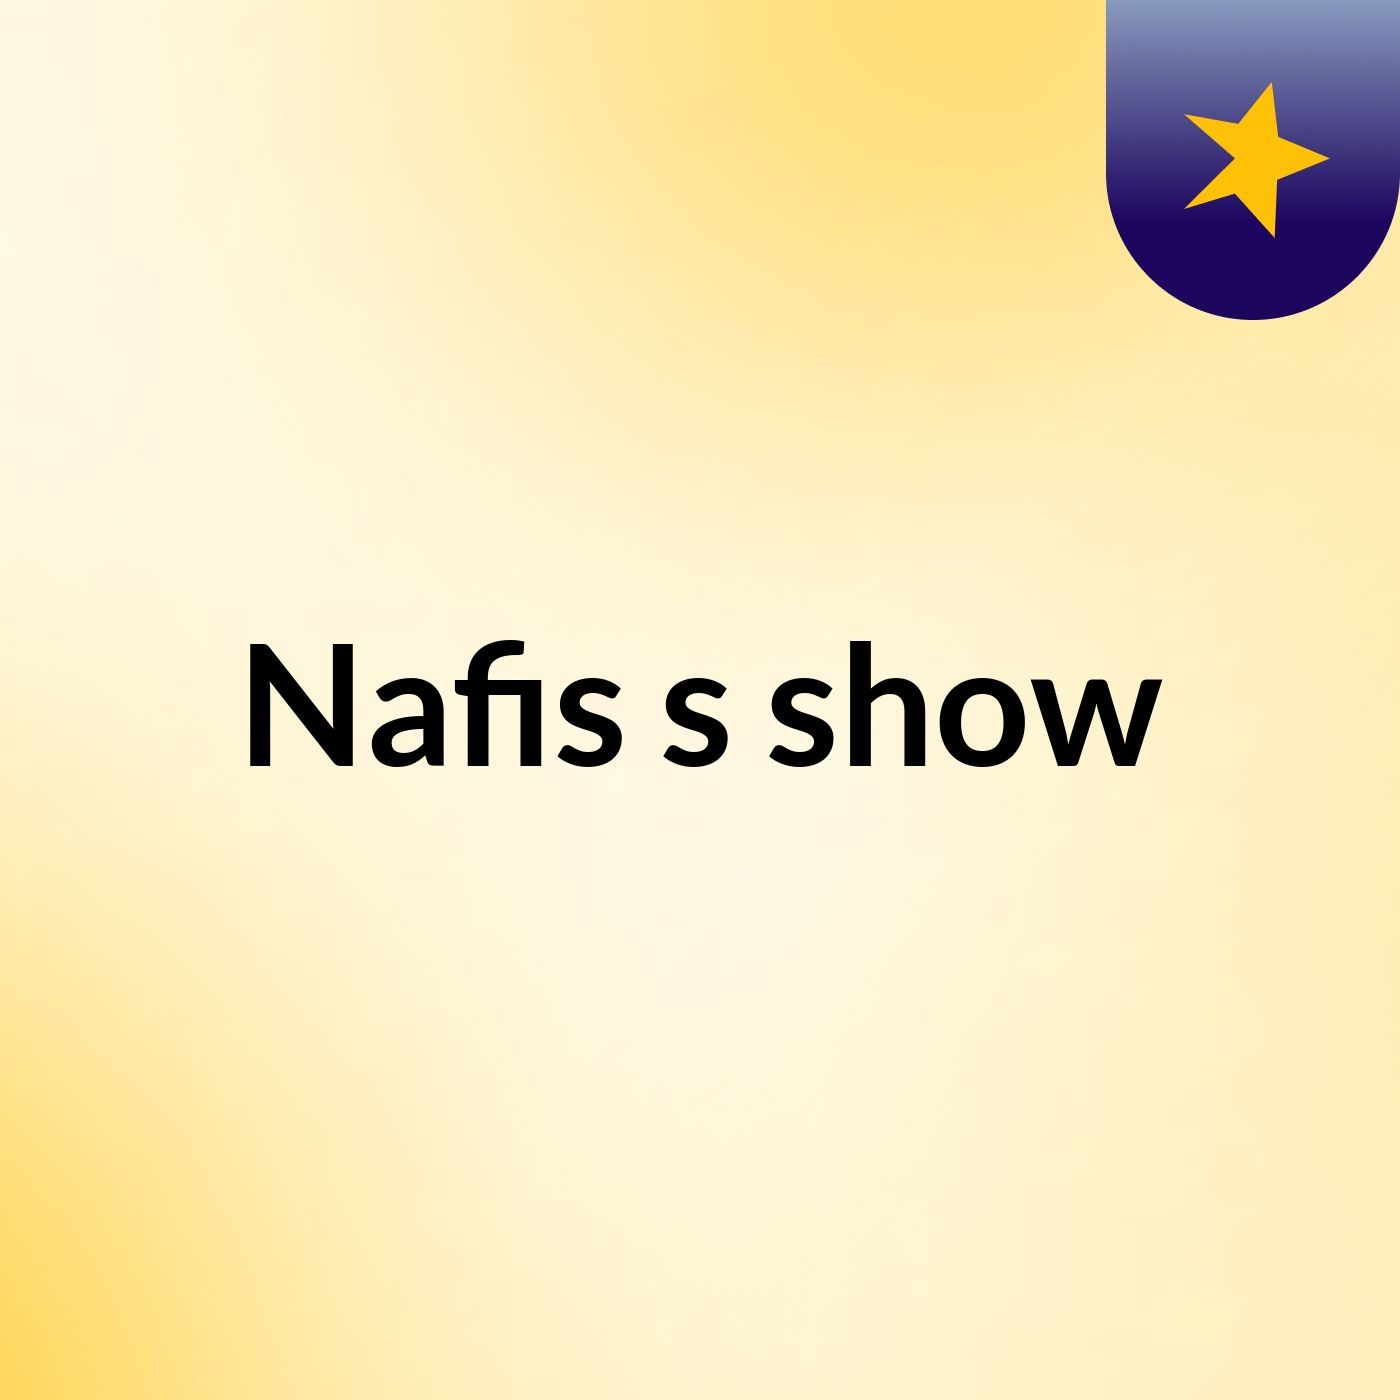 Nafis's show